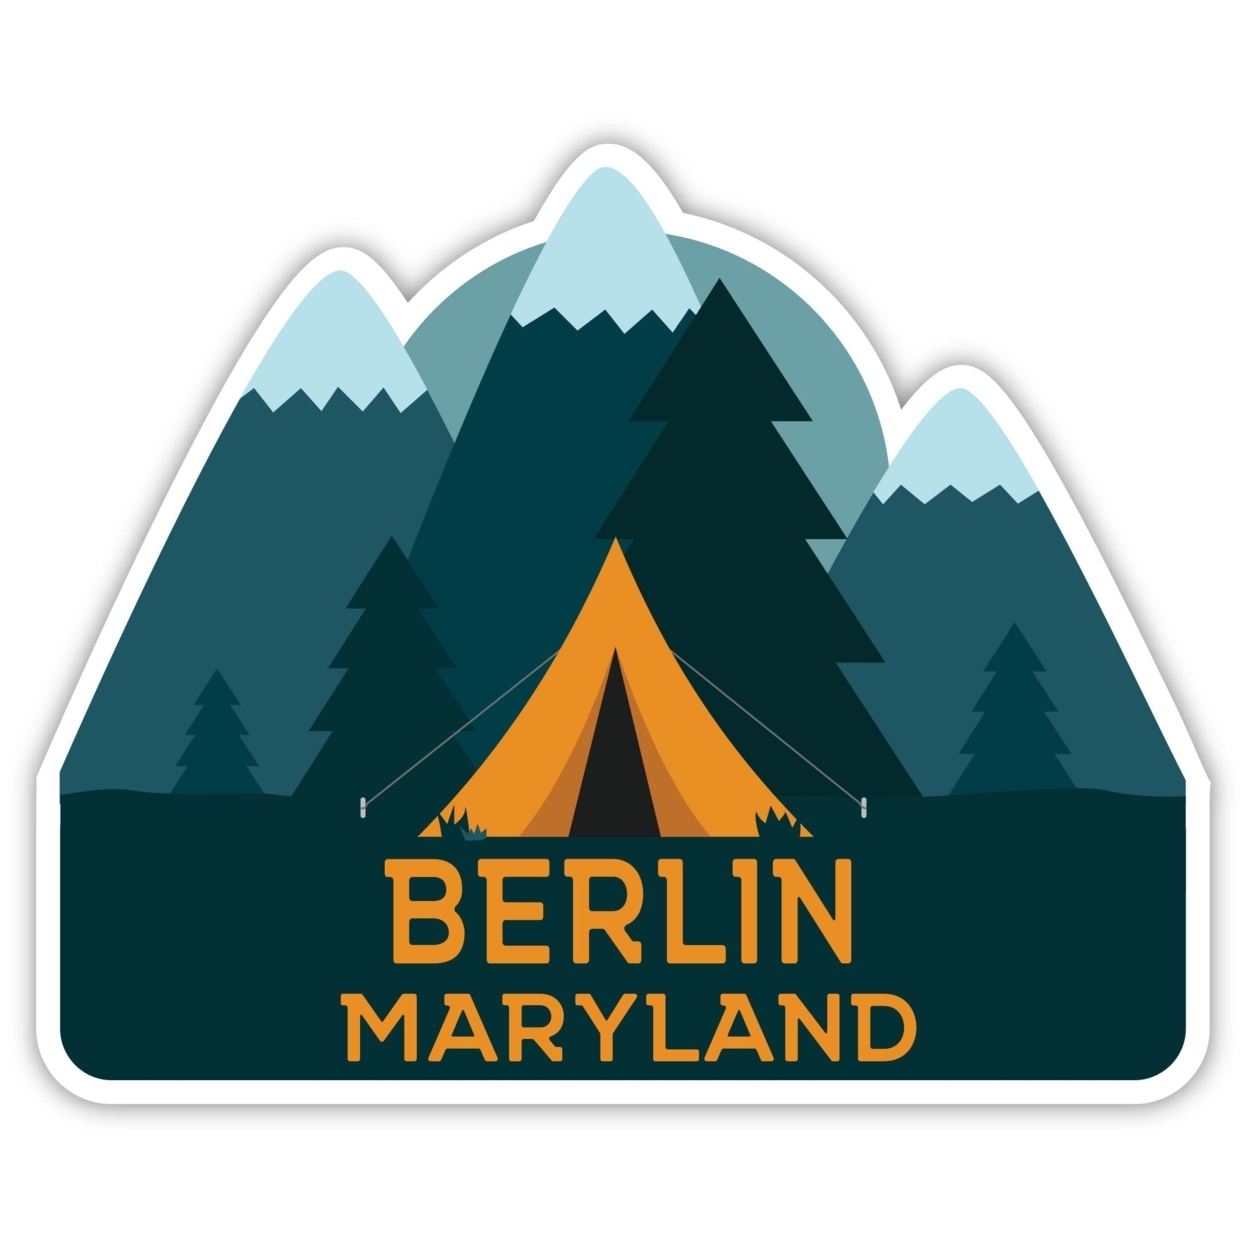 Berlin Maryland Souvenir Decorative Stickers (Choose Theme And Size) - Single Unit, 6-Inch, Tent